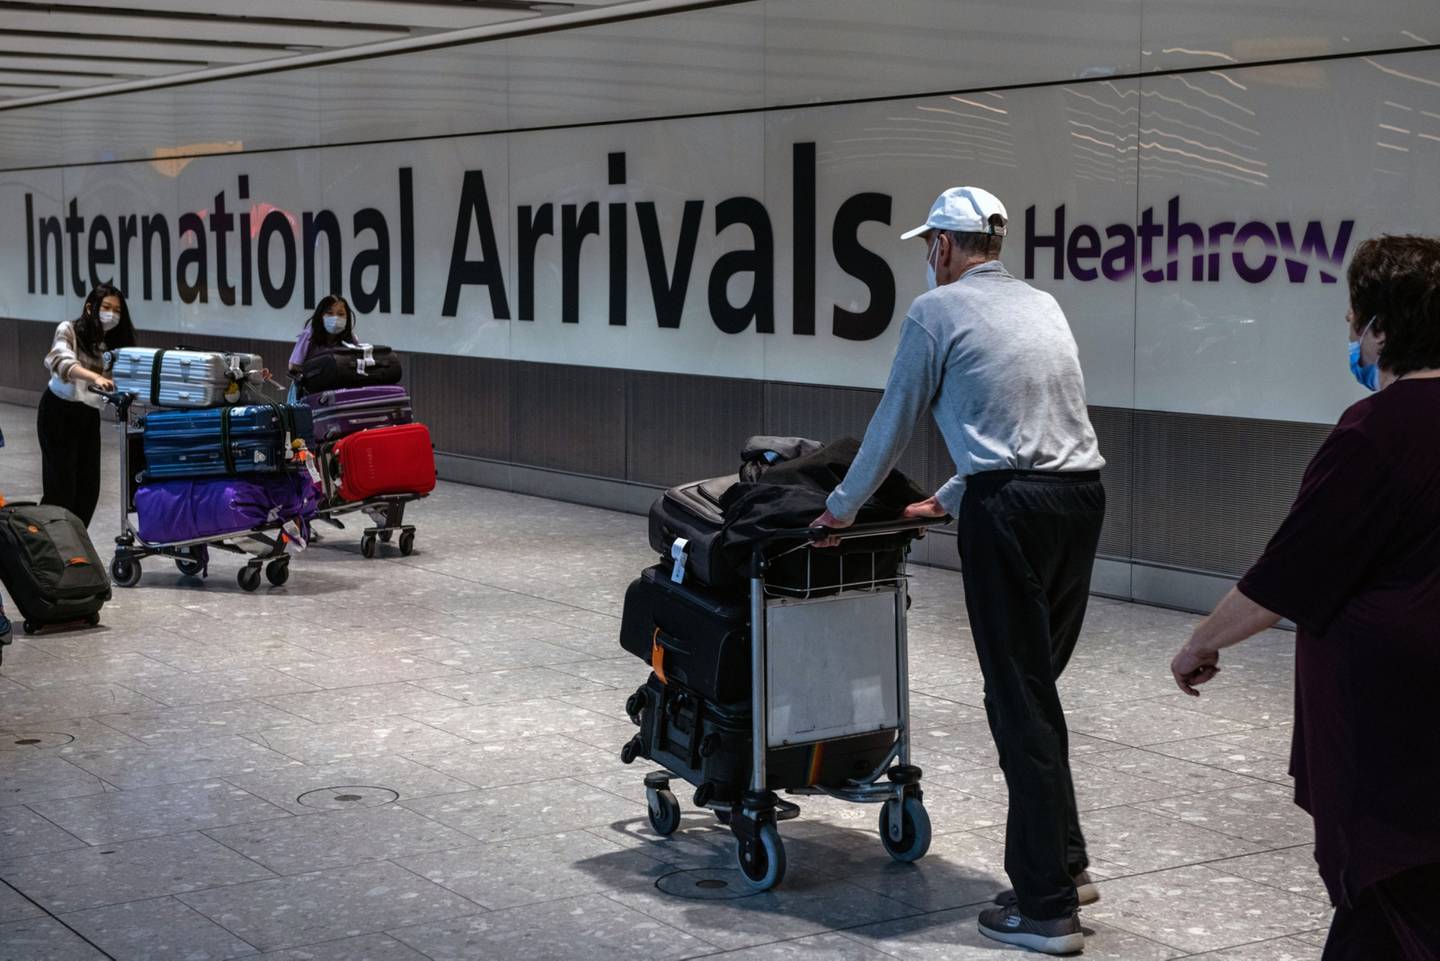 Passengers in the arrivals hall of Terminal 5 at London Heathrow Airport in London, UK, on Monday. Bloomberg 